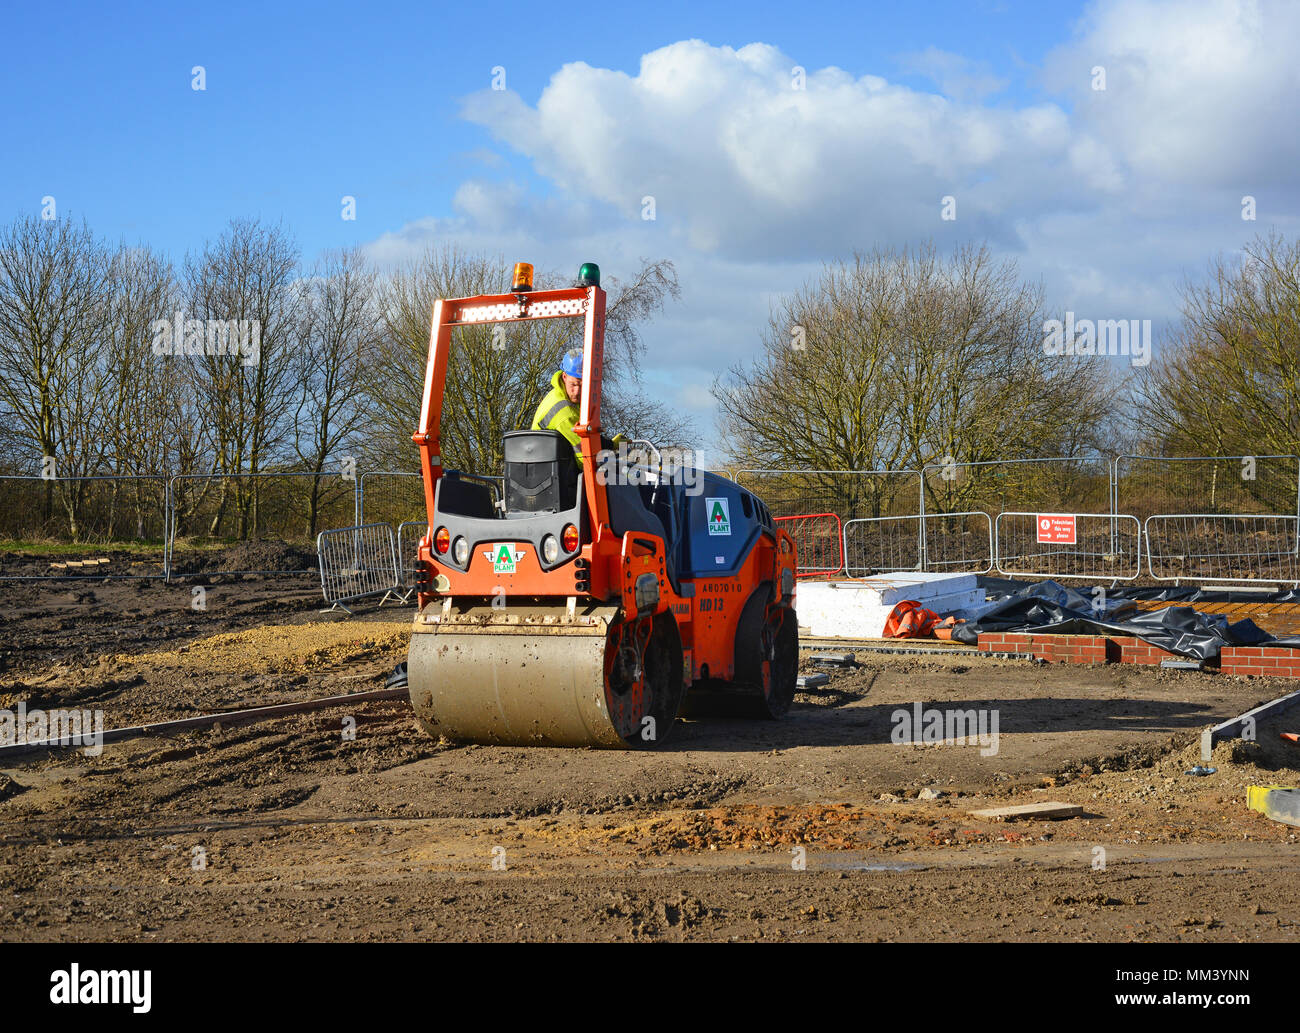 roller compacting soil preparing ground for new house construction barley fields selby yorkshire united kingdom Stock Photo